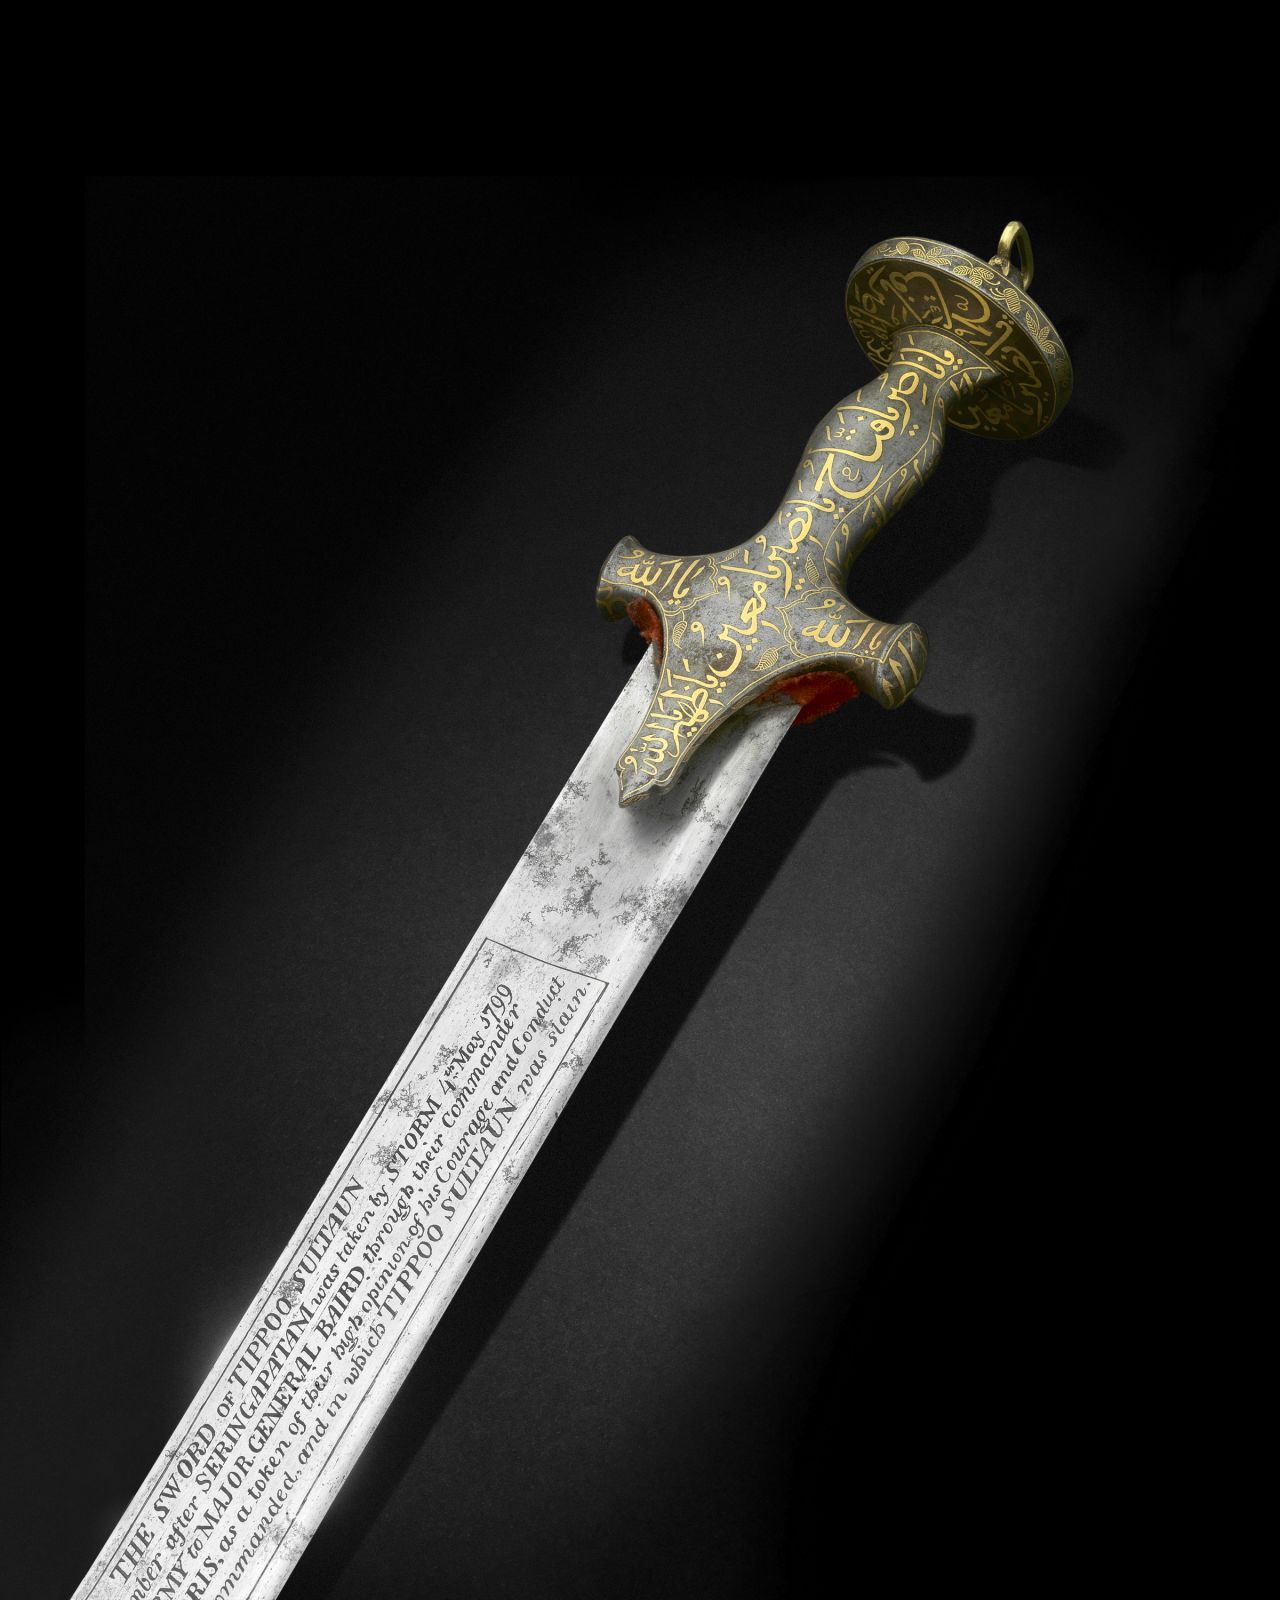 The sword was found in the sultan's private palace quarters, near where he slept, after his death.